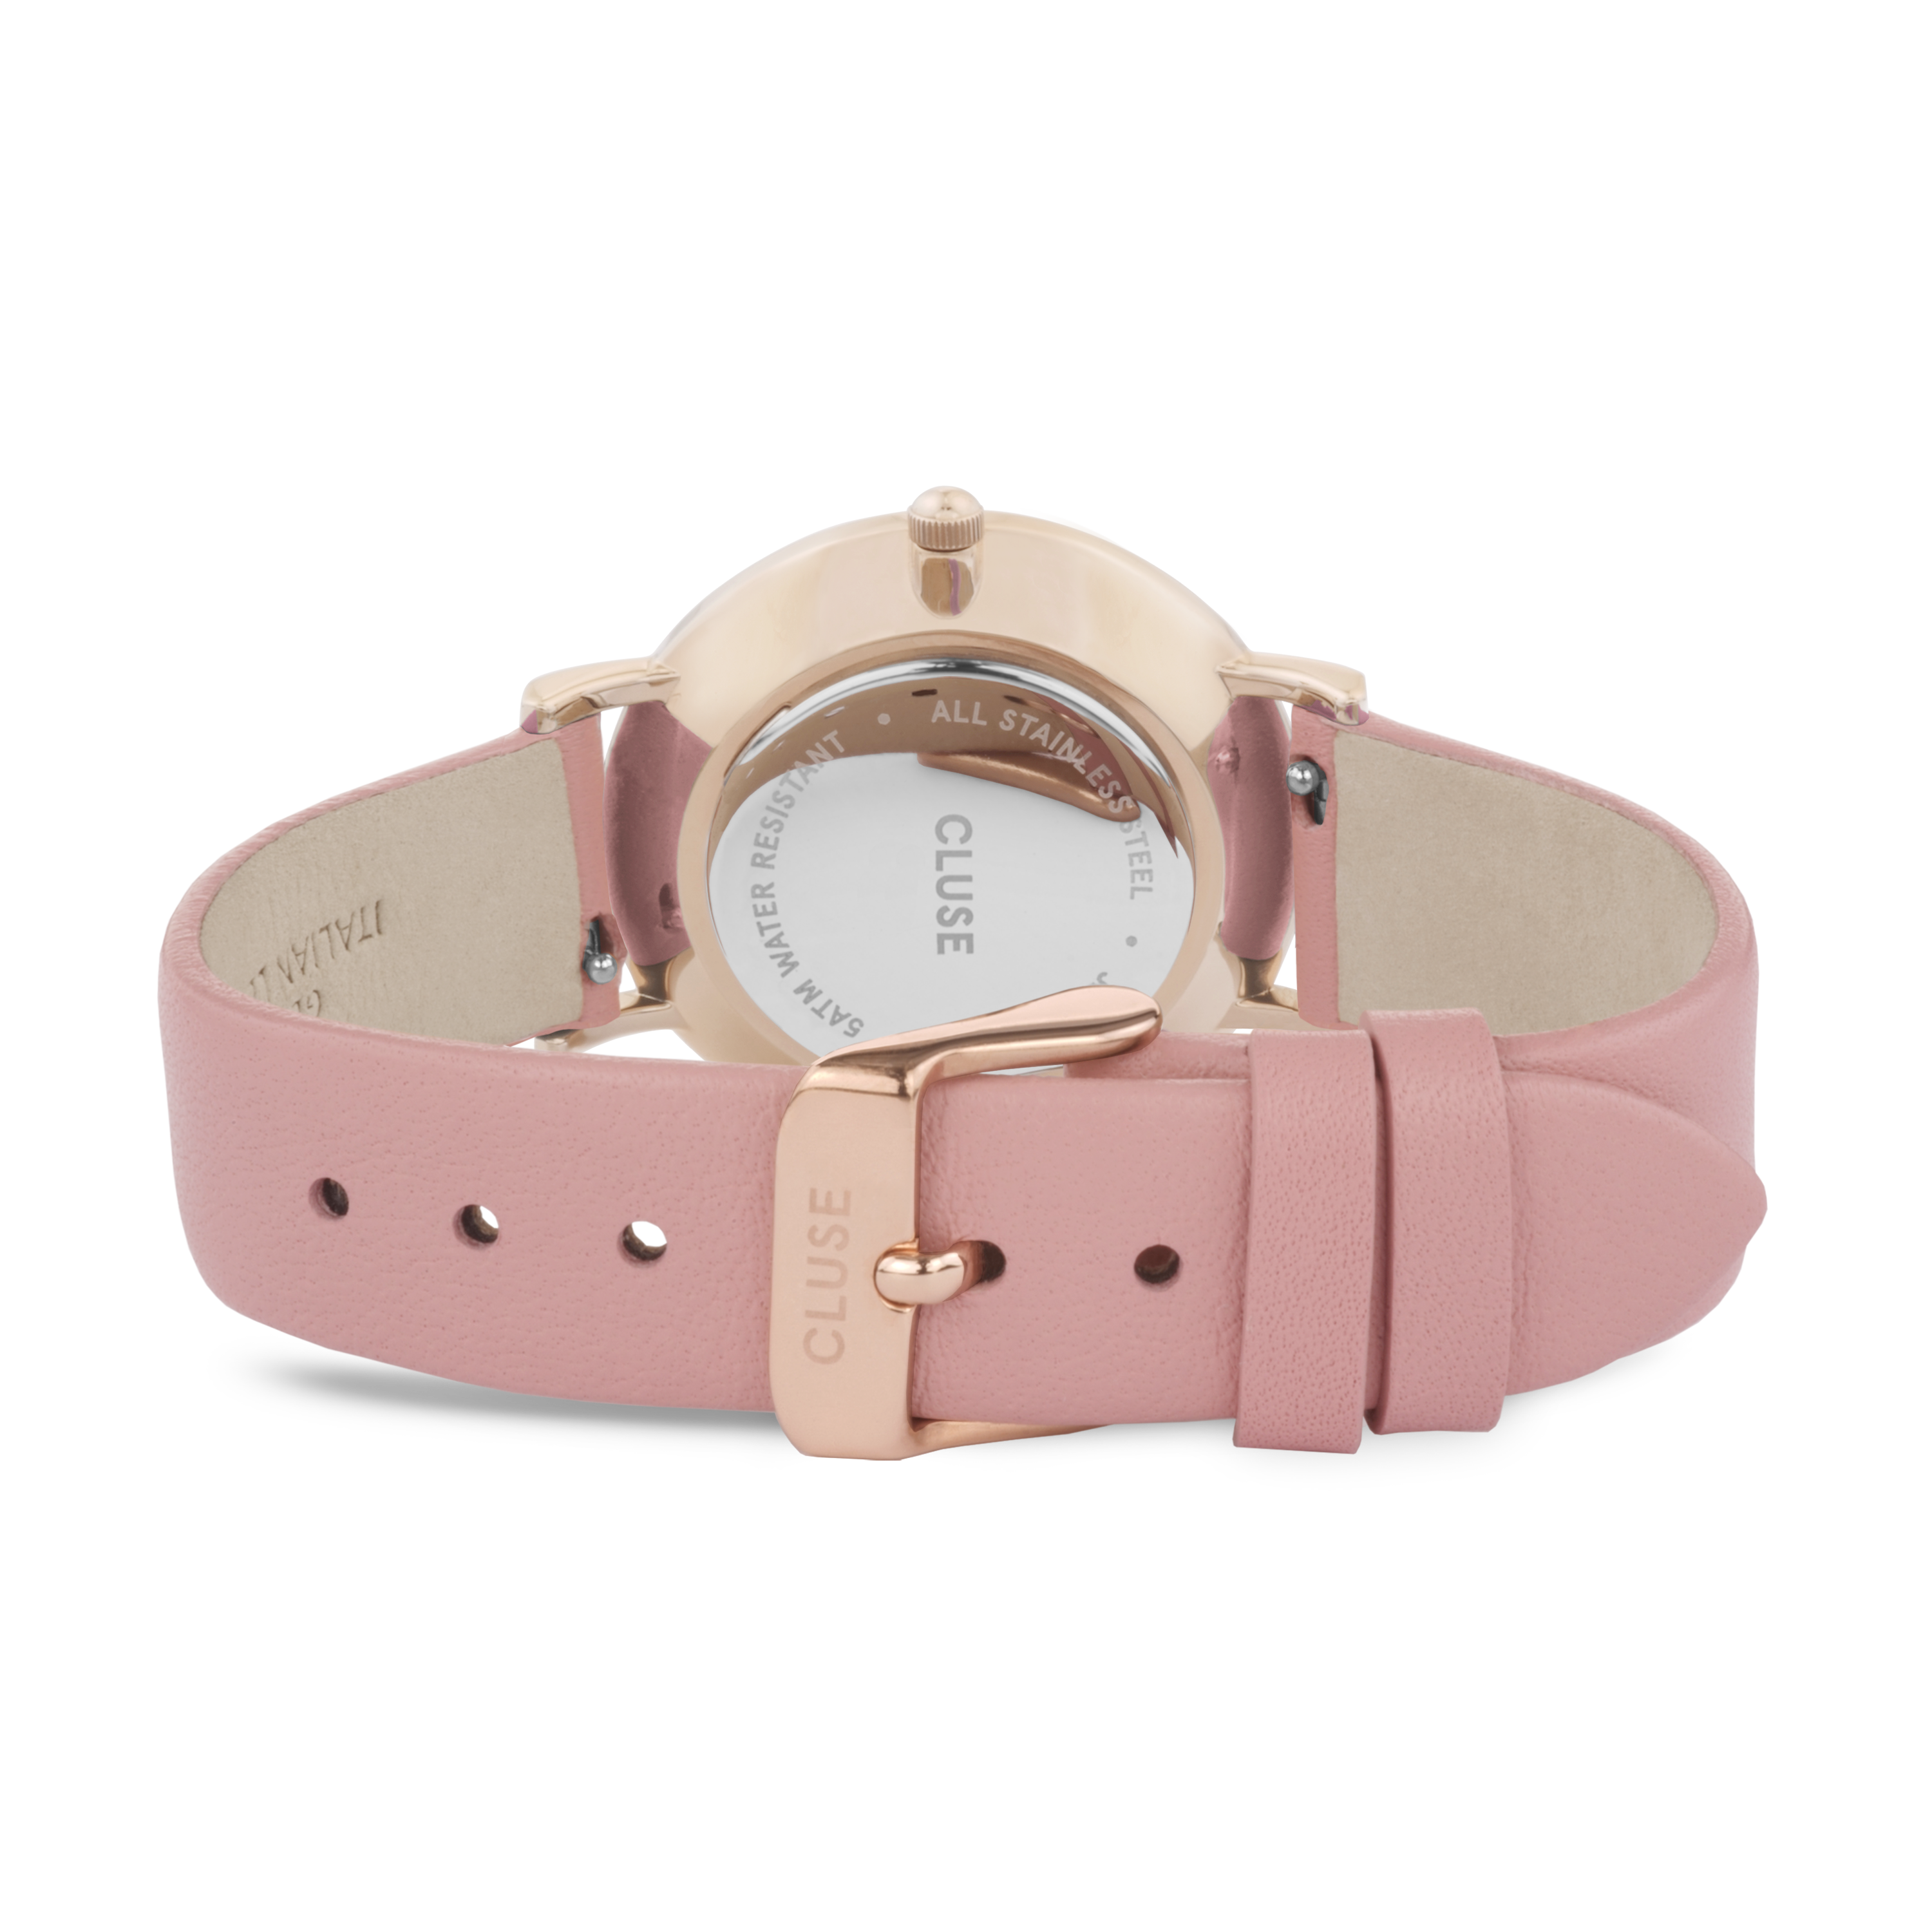 Cluse - Le Couronnement Rose Gold & Soft Rose Watch